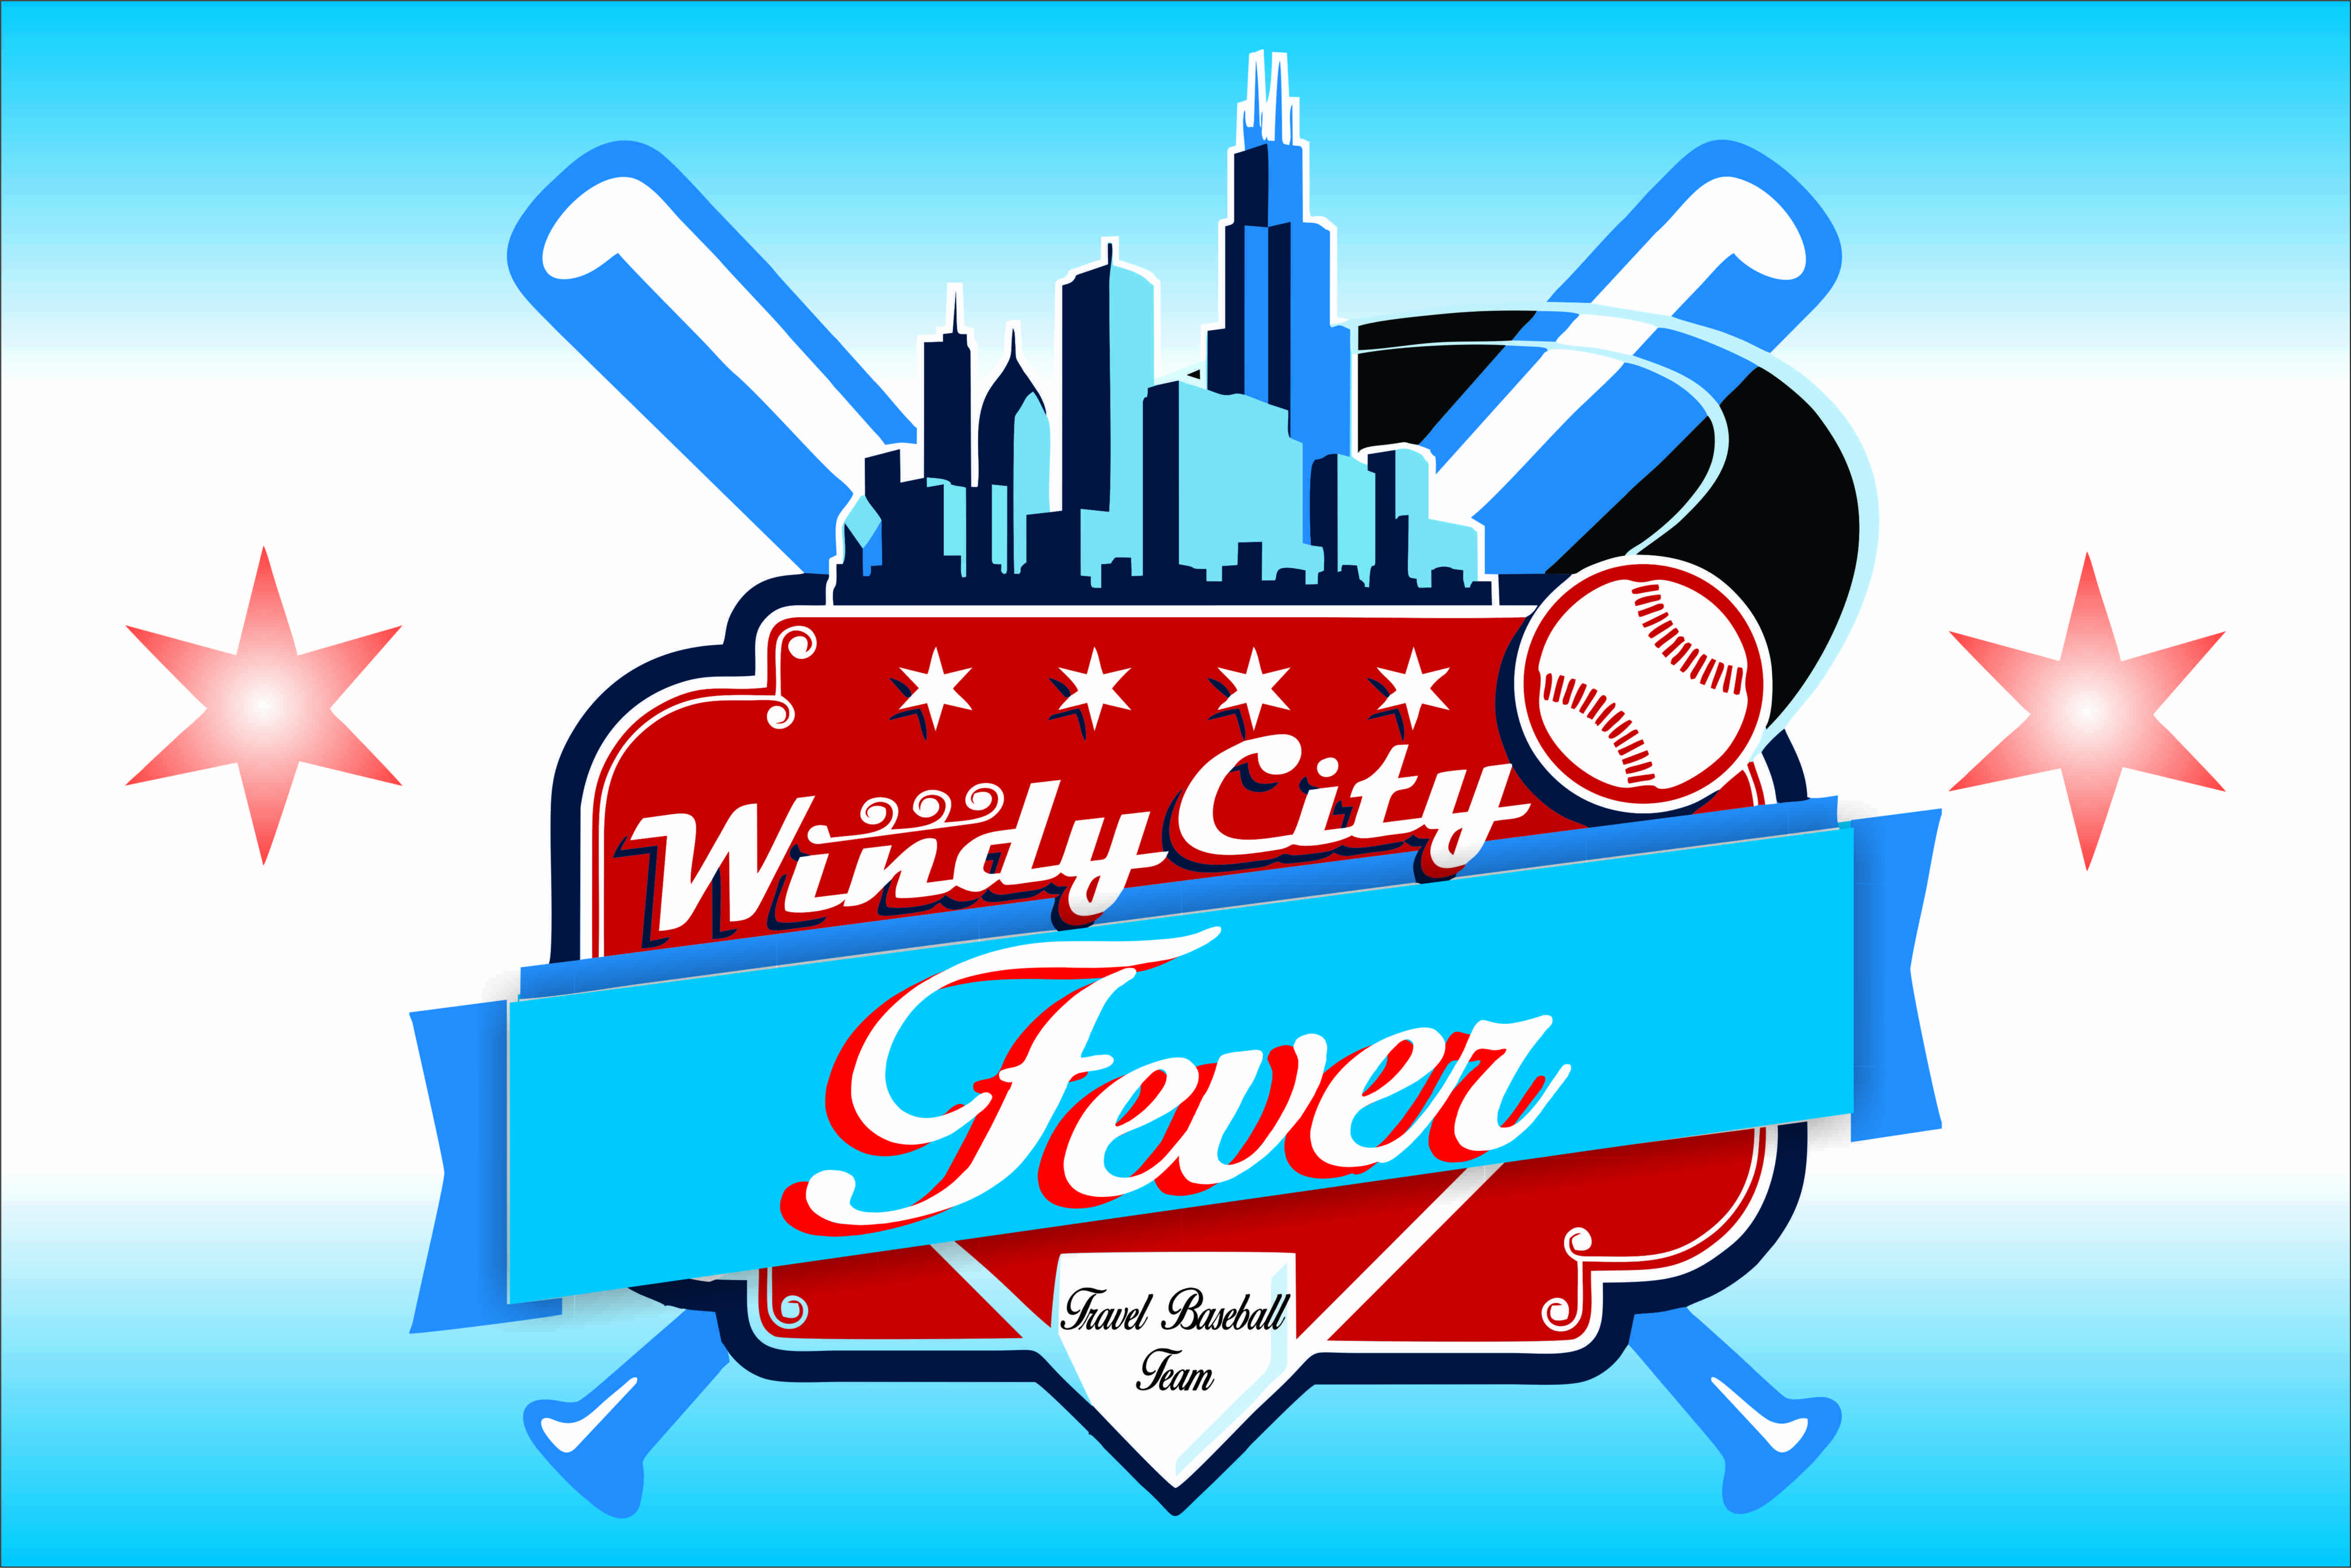 City Of Fever Backgrounds, Compatible - PC, Mobile, Gadgets| 5309x3541 px